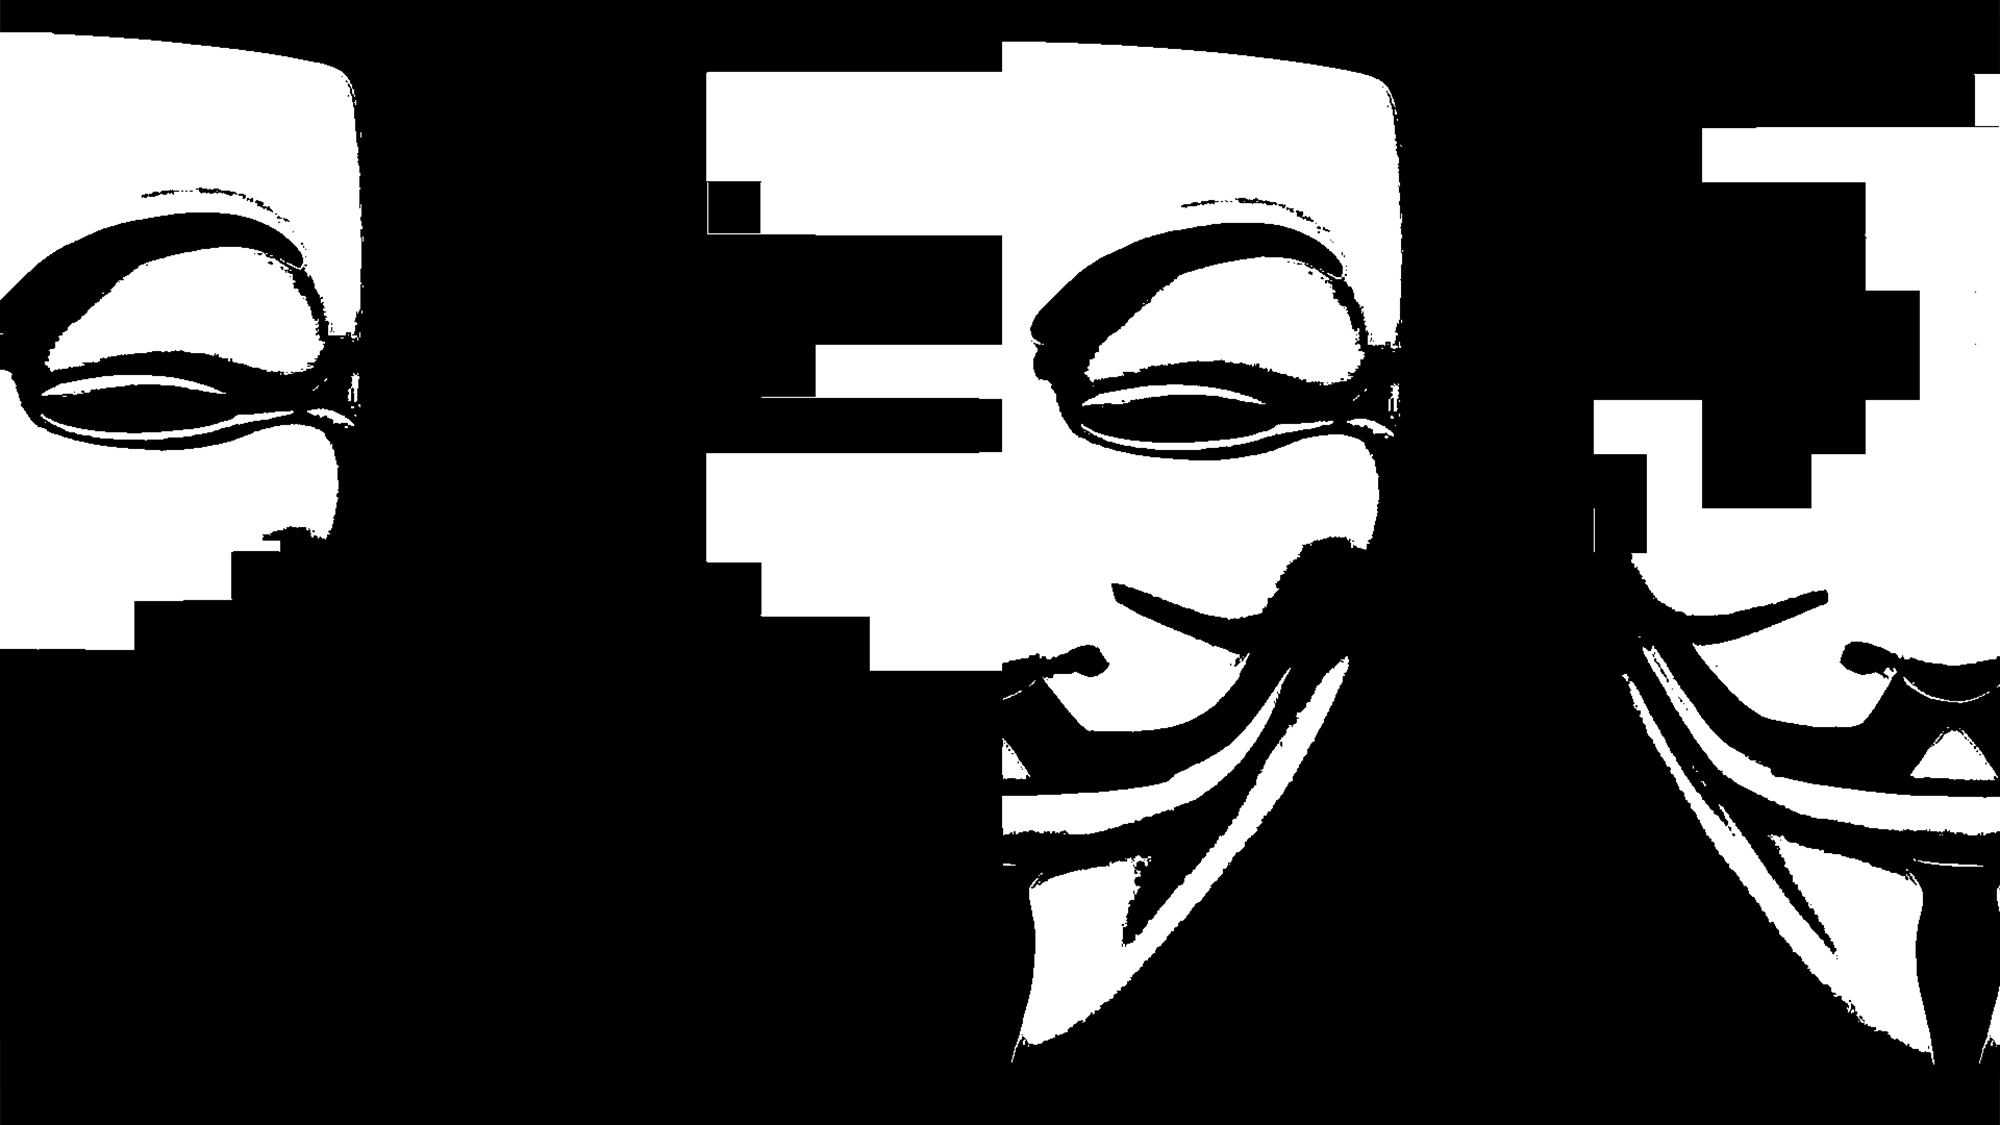 The Hacker Group Anonymous Returns The Atlantic - roblox bully story nazi flag